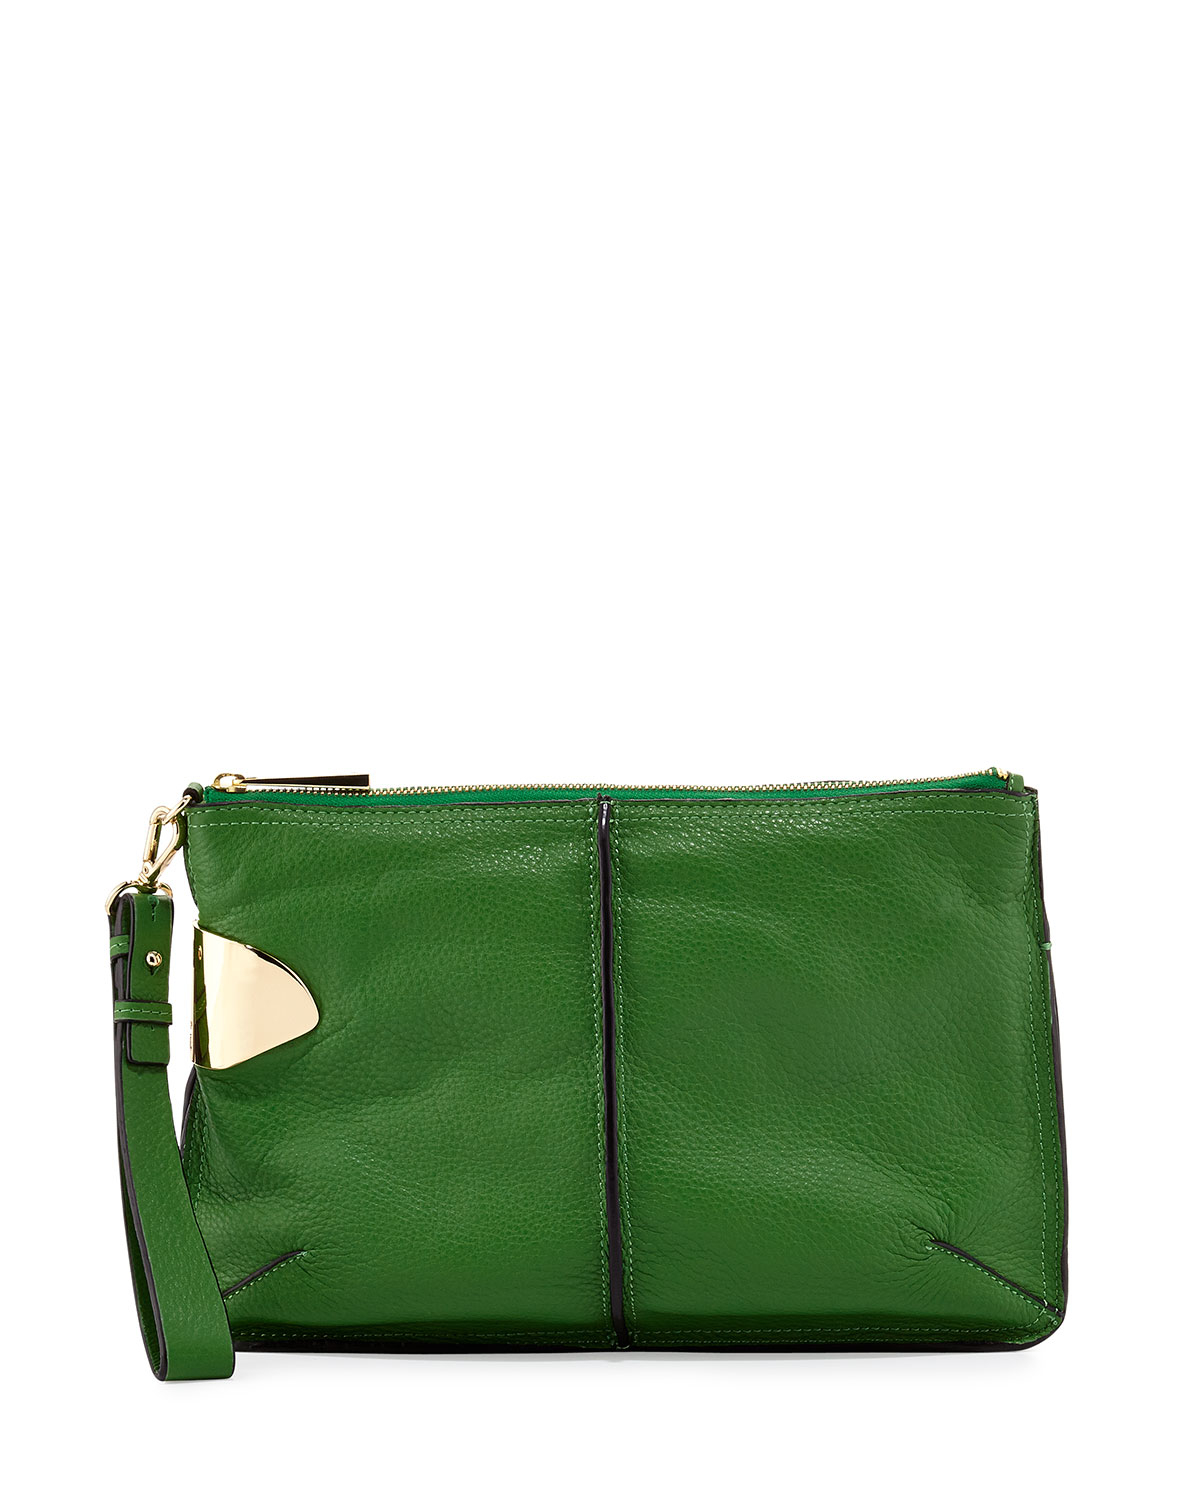 Halston Heritage Large Leather Wristlet Clutch Bag Grass in Green ...